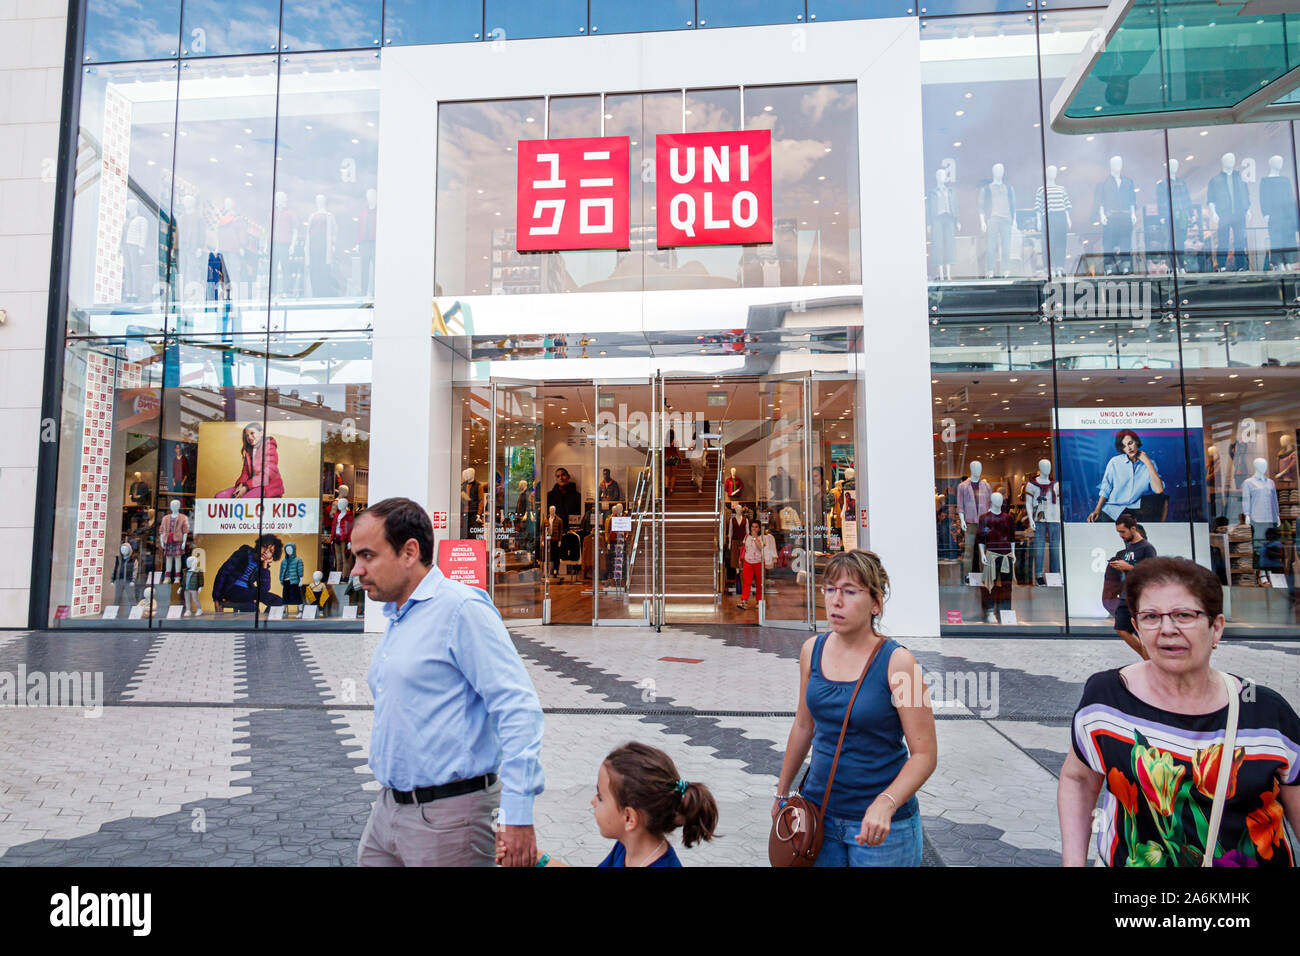 Uniqlo Store Exterior High Resolution Stock Photography and Images - Alamy